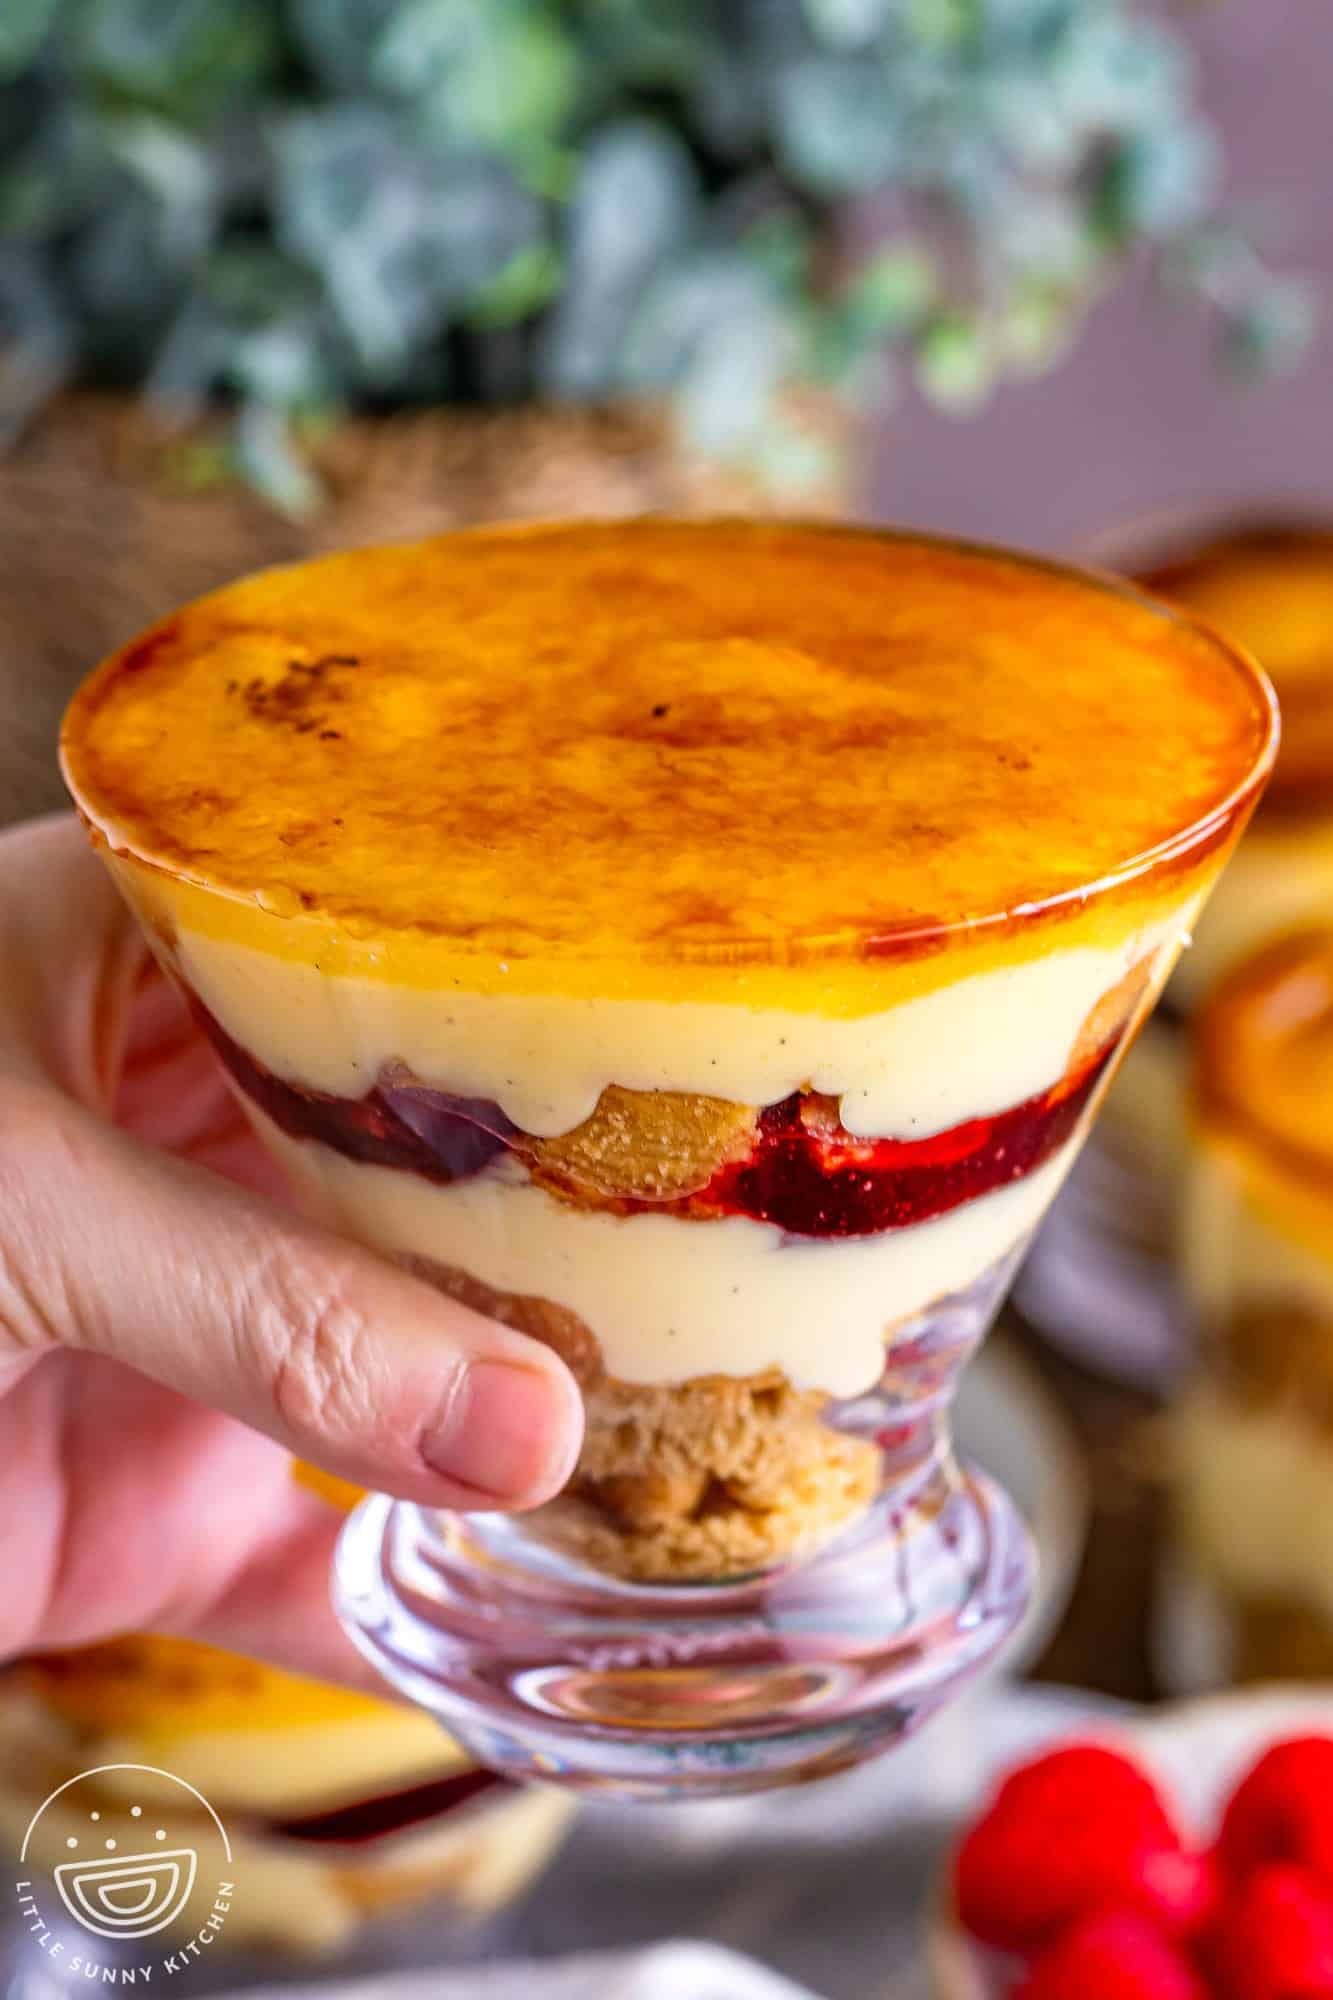 Holding a cup with creme brulee trifle